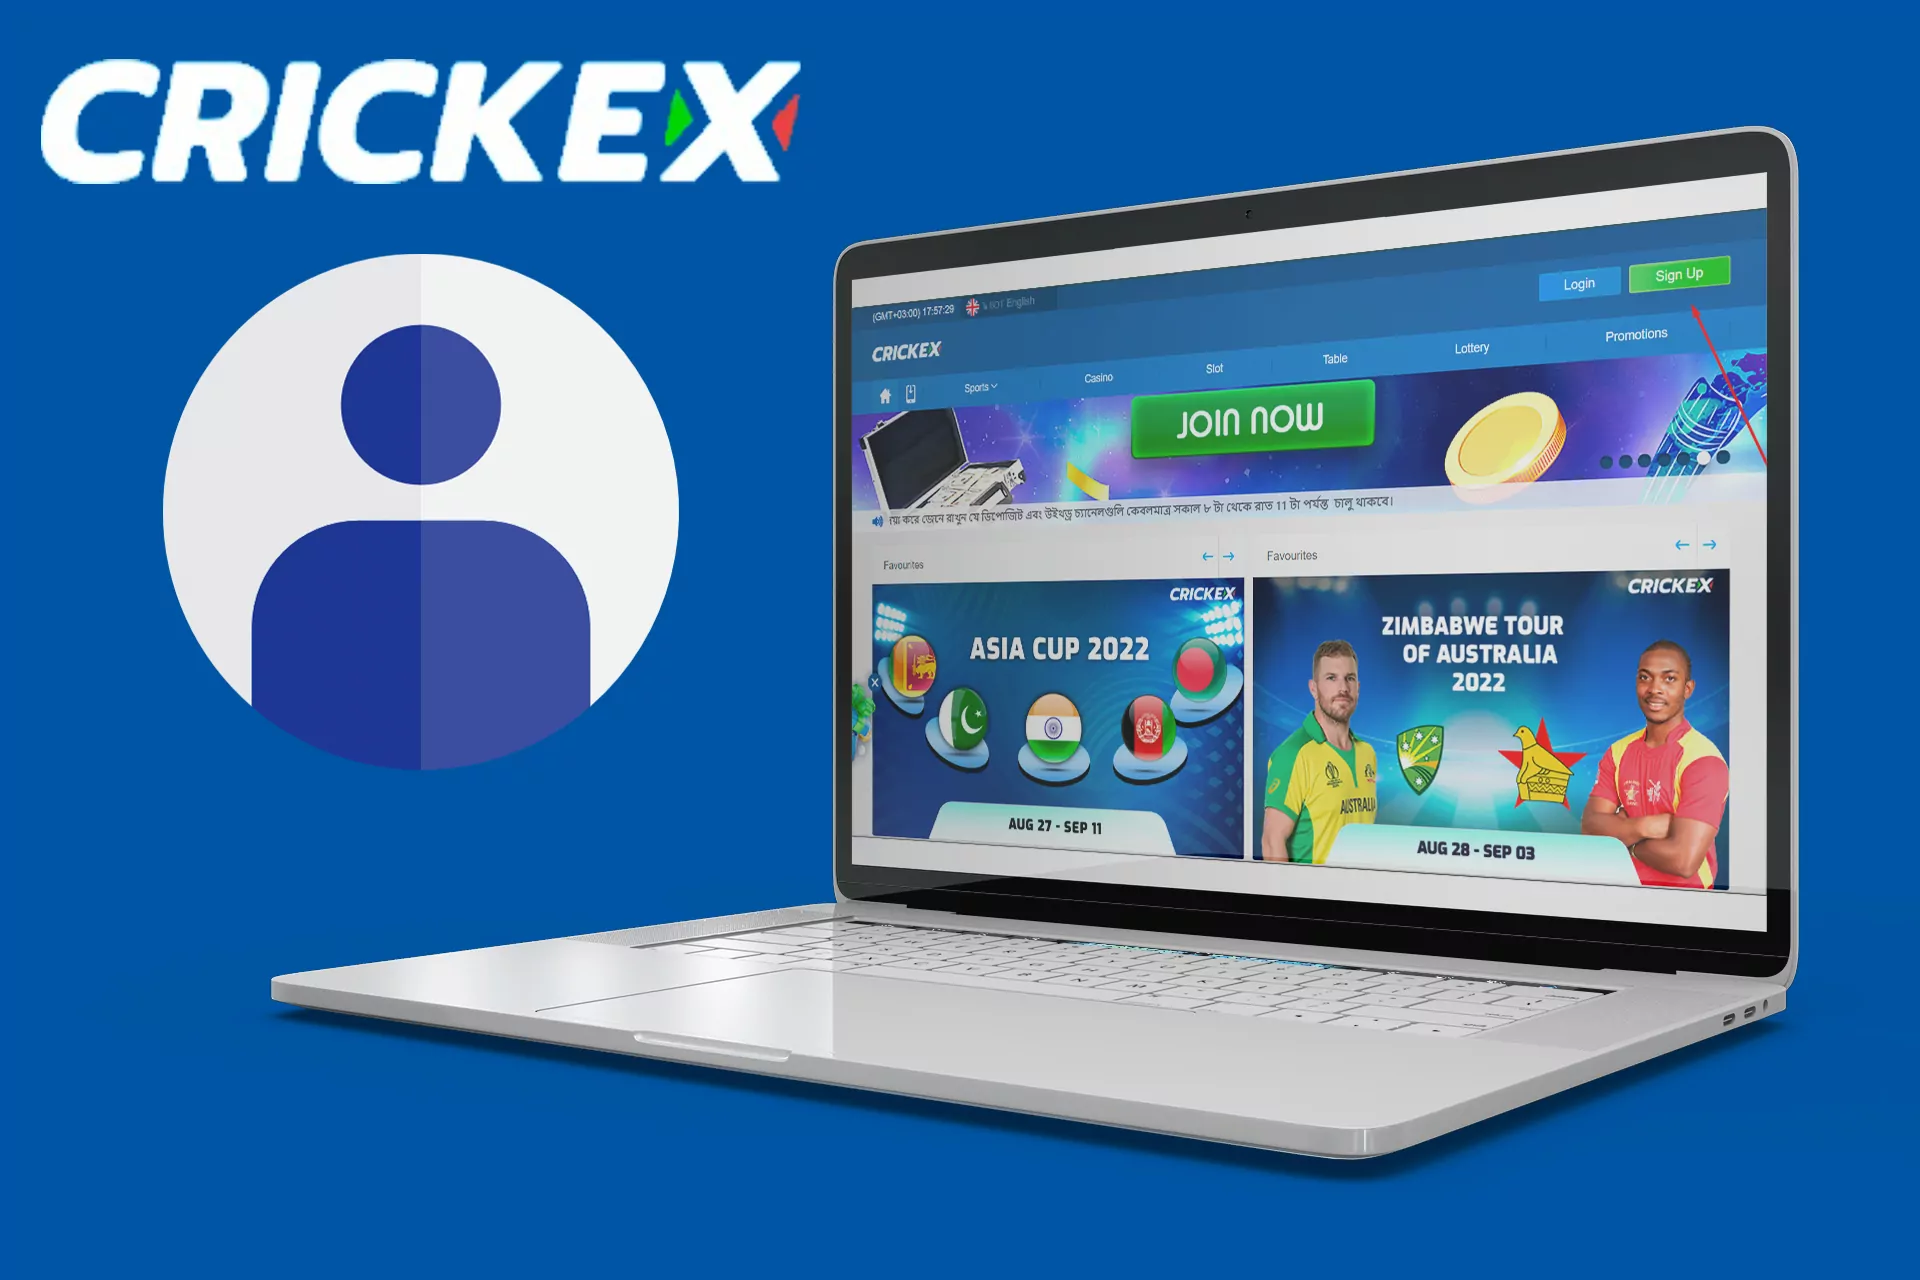 Go to the Crickex official website and open the form.